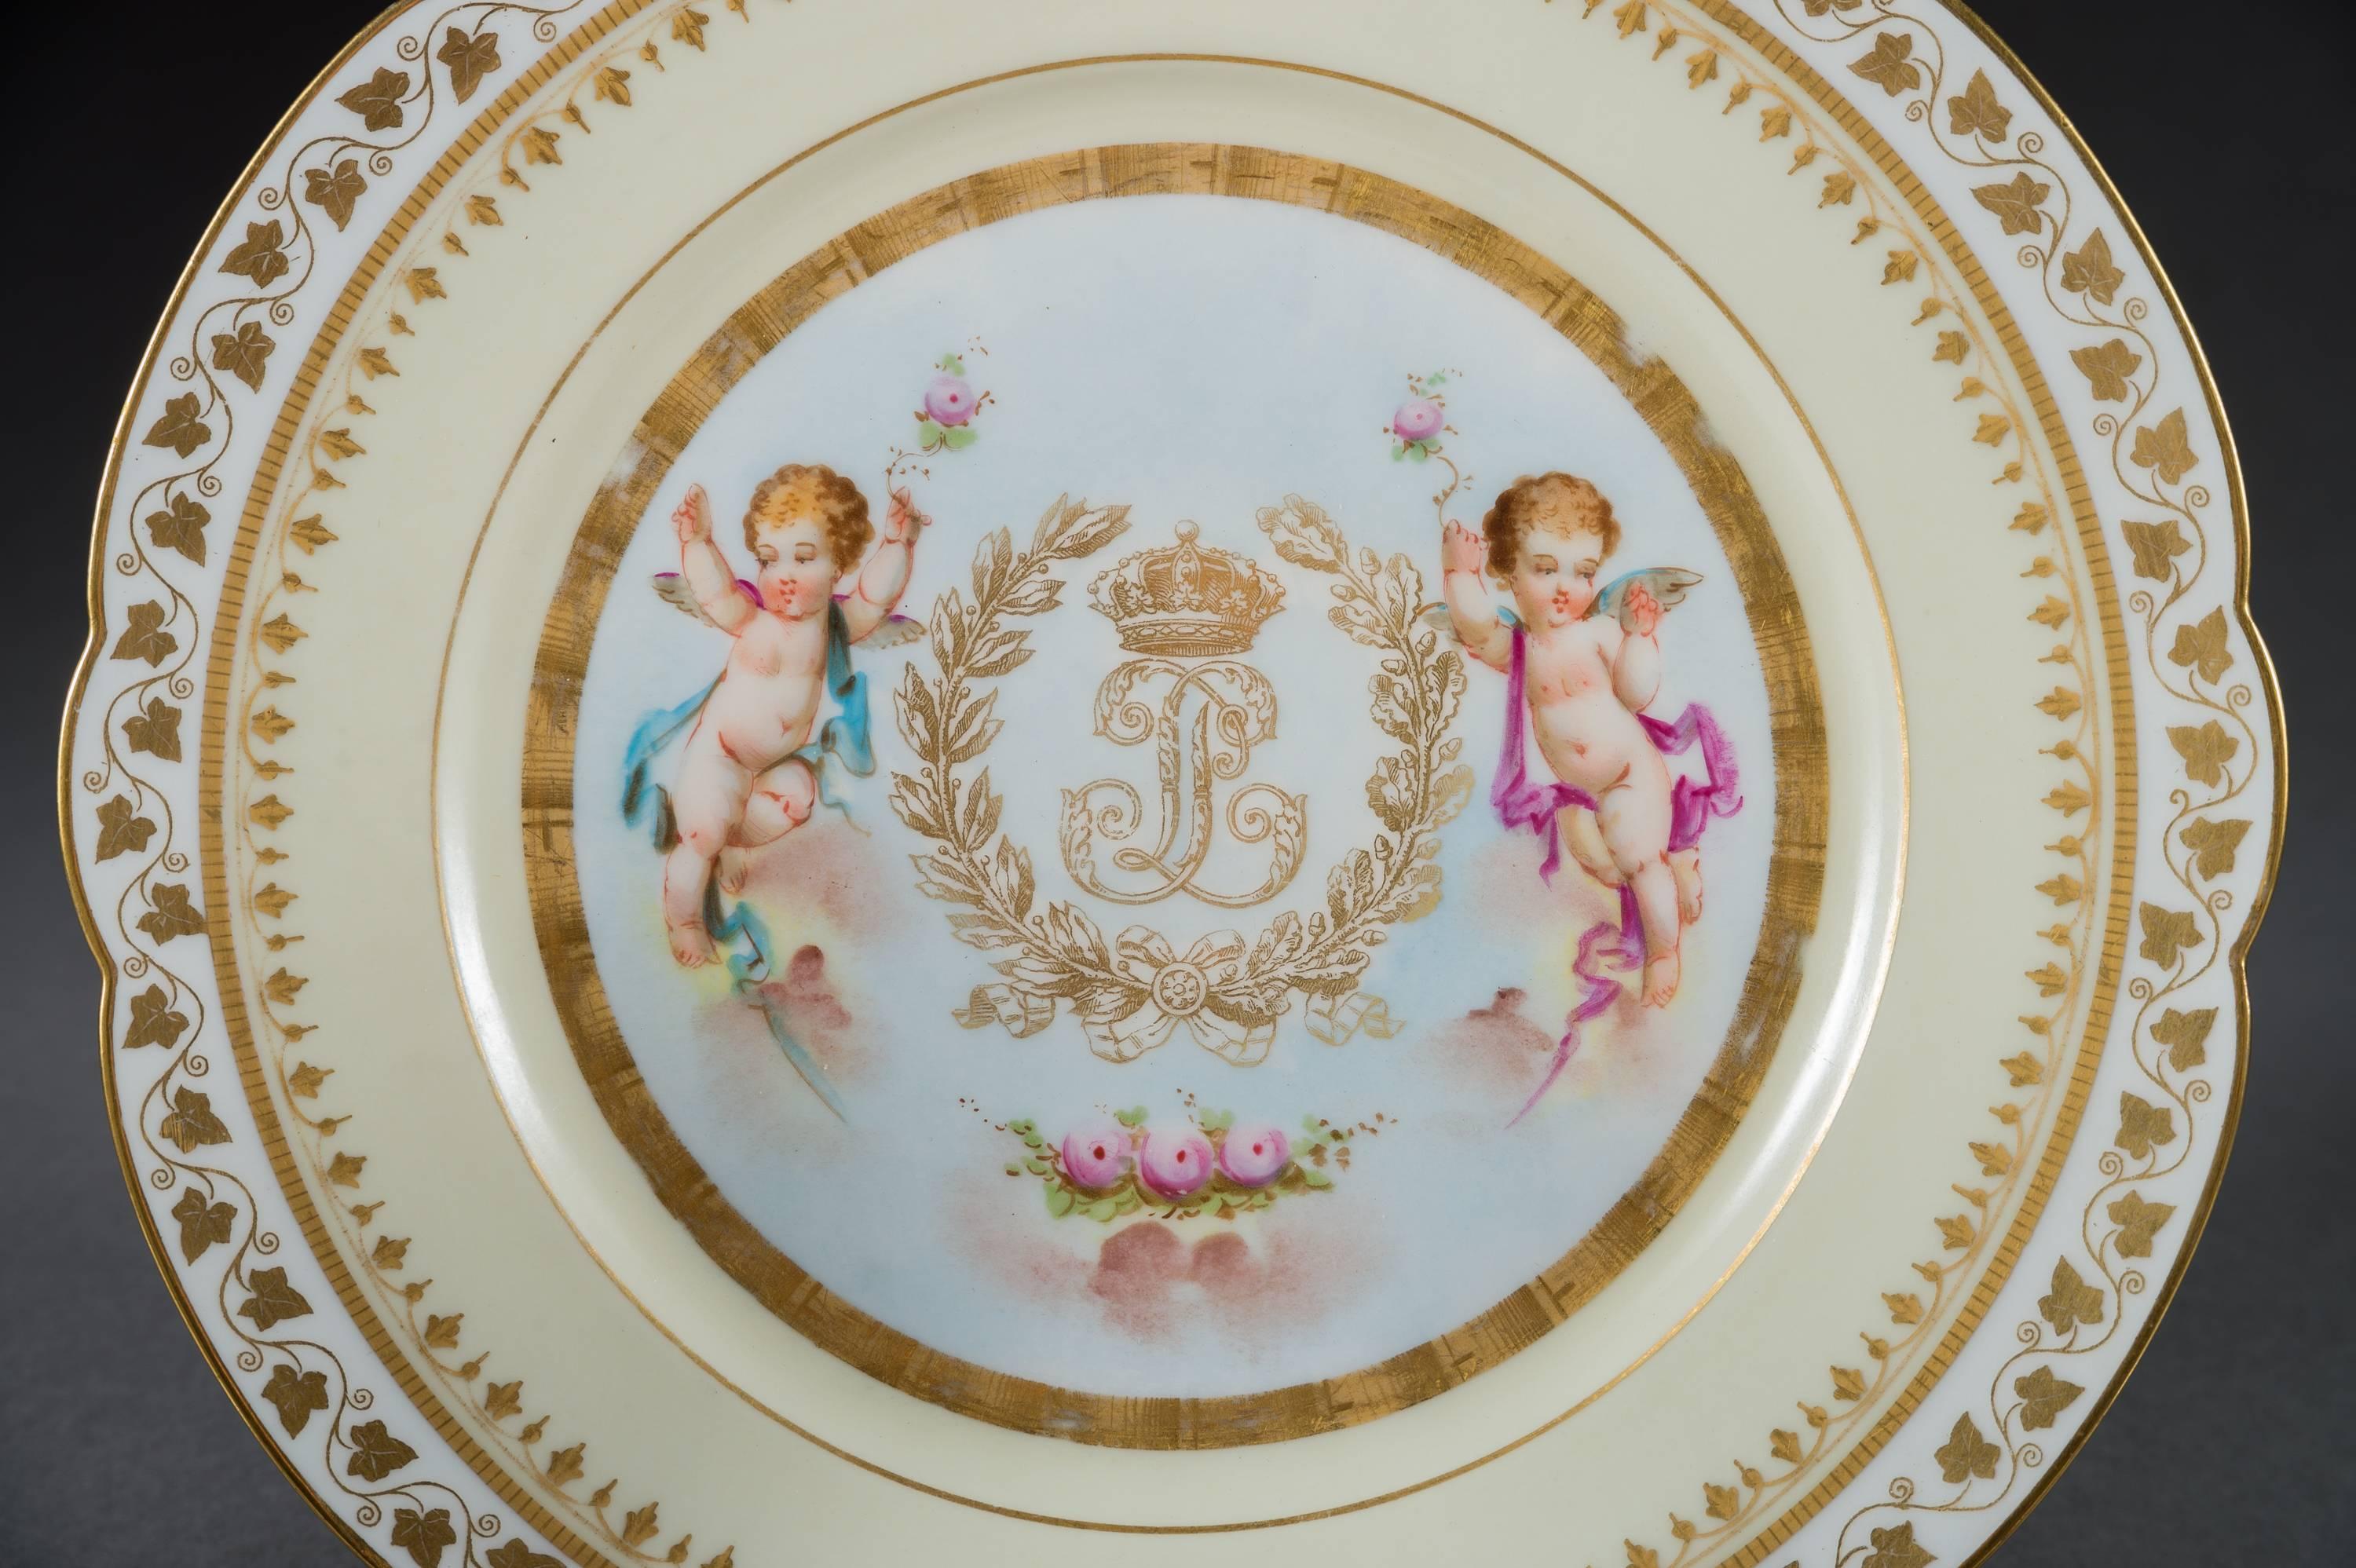 A very fine set of twelve (12) French Sevres pink ground porcelain painted and jeweled plates. 

Each with a gold and pink border with a central painting depicting cherubs with a garland of flowers, with a gold Royal coat of arms. 

Each signed